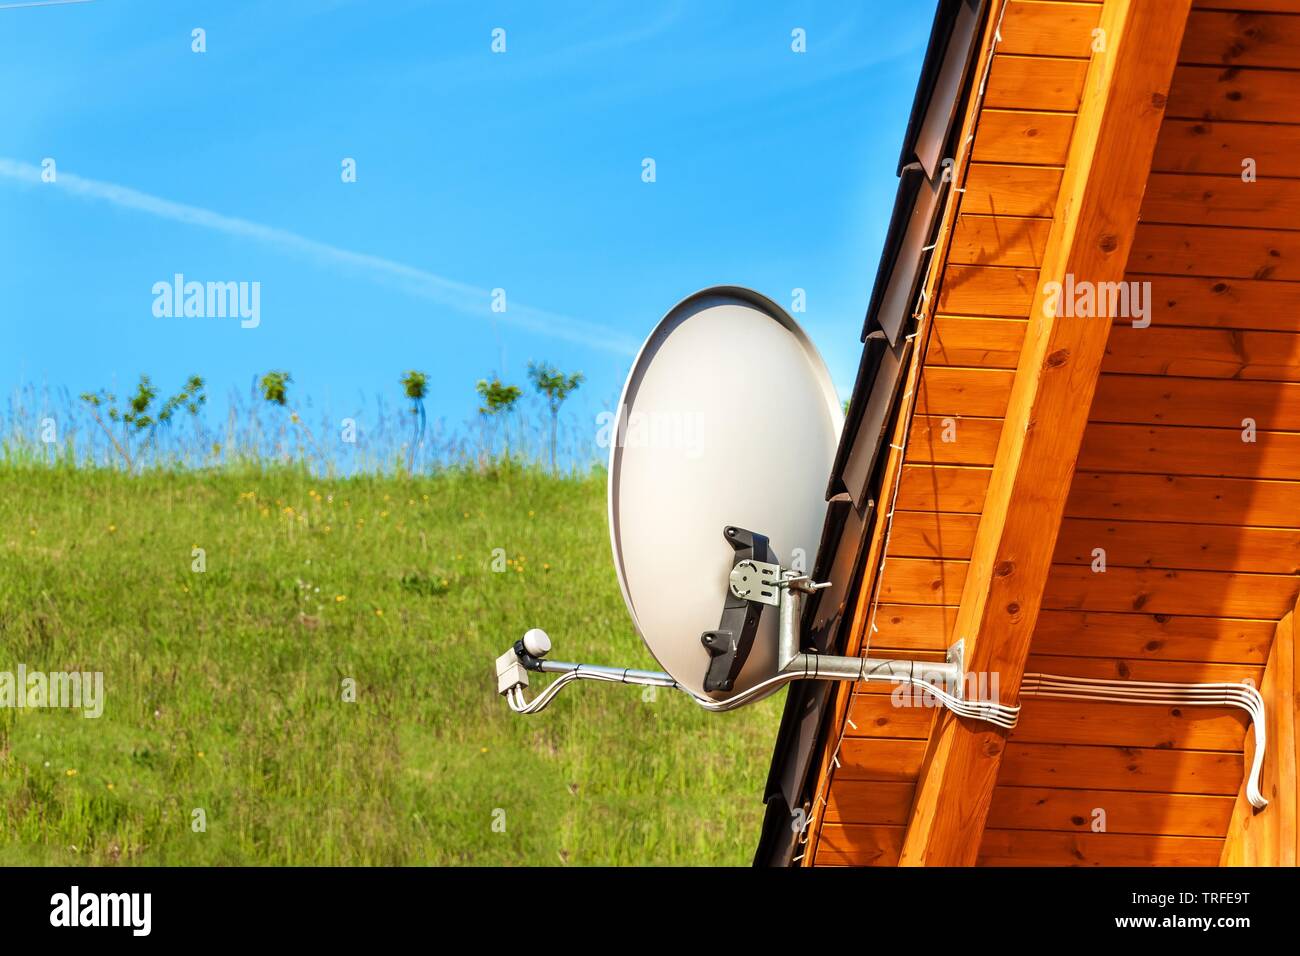 Satellite Tv Antenna On A Wooden House Tv Signal Transmission Internet Access Telecommunication Means Stock Photo Alamy